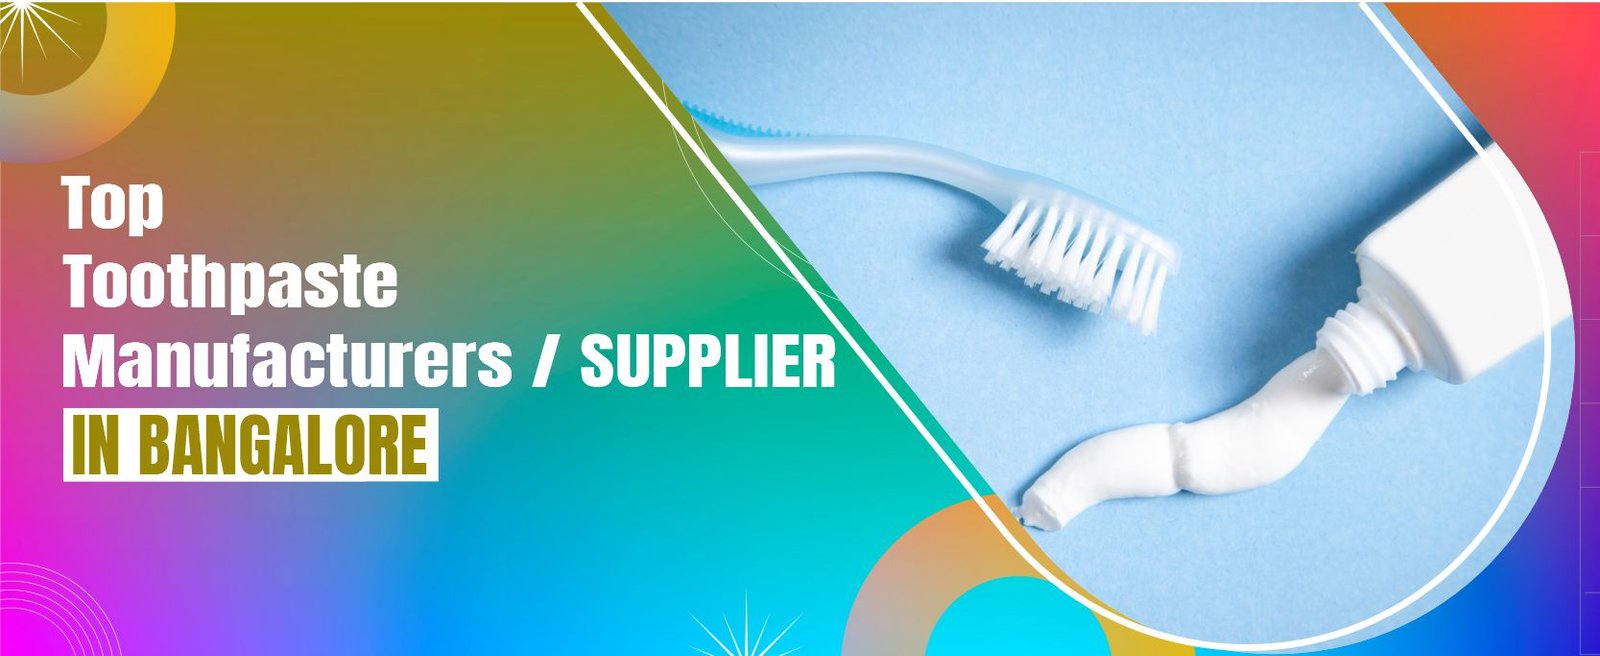 Toothpaste Manufacturers / Supplier In Bangalore